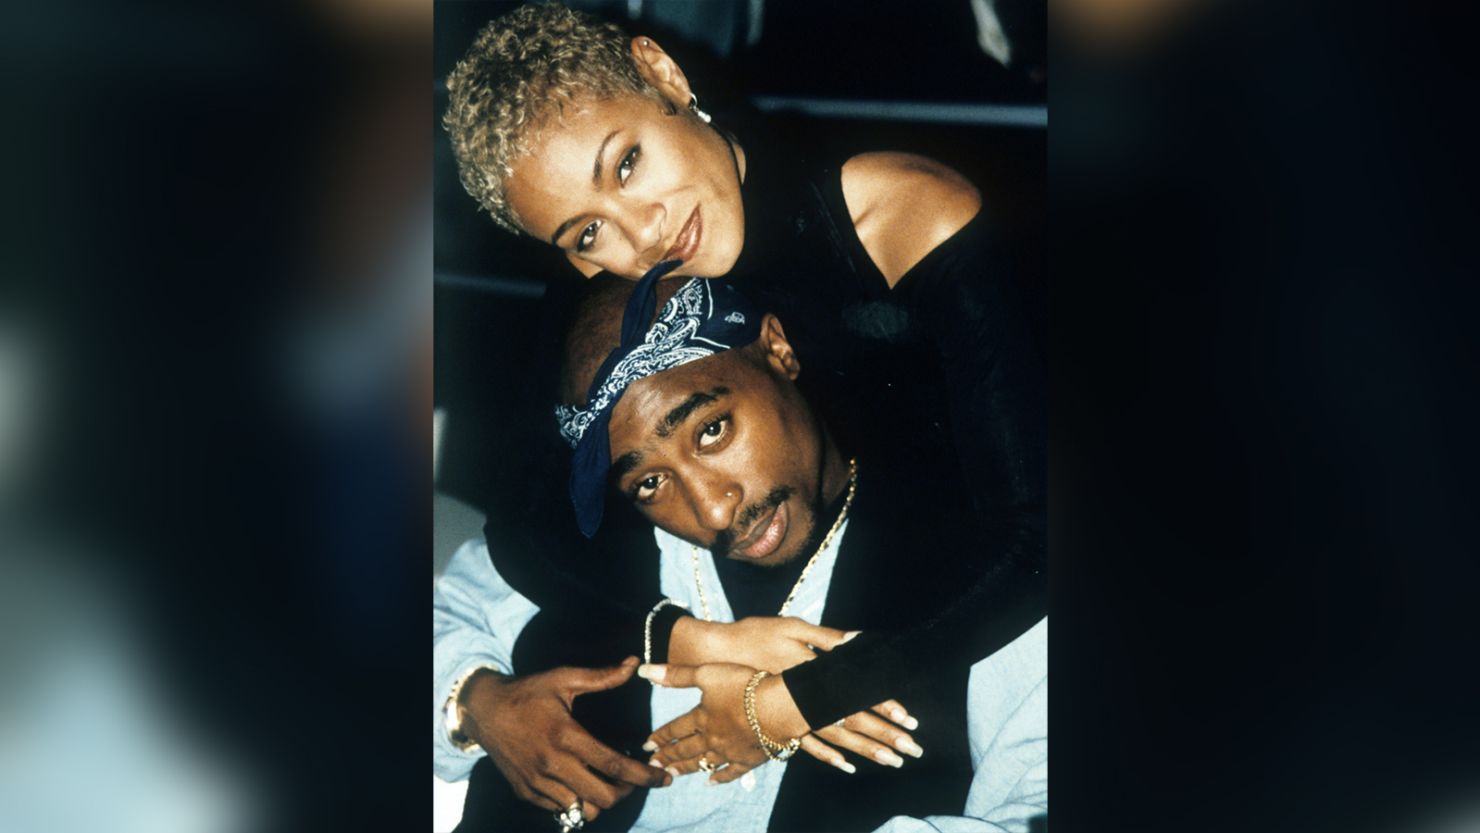 Jada Pinkett Smith (top) pictured with Tupac Shakur in 1996.